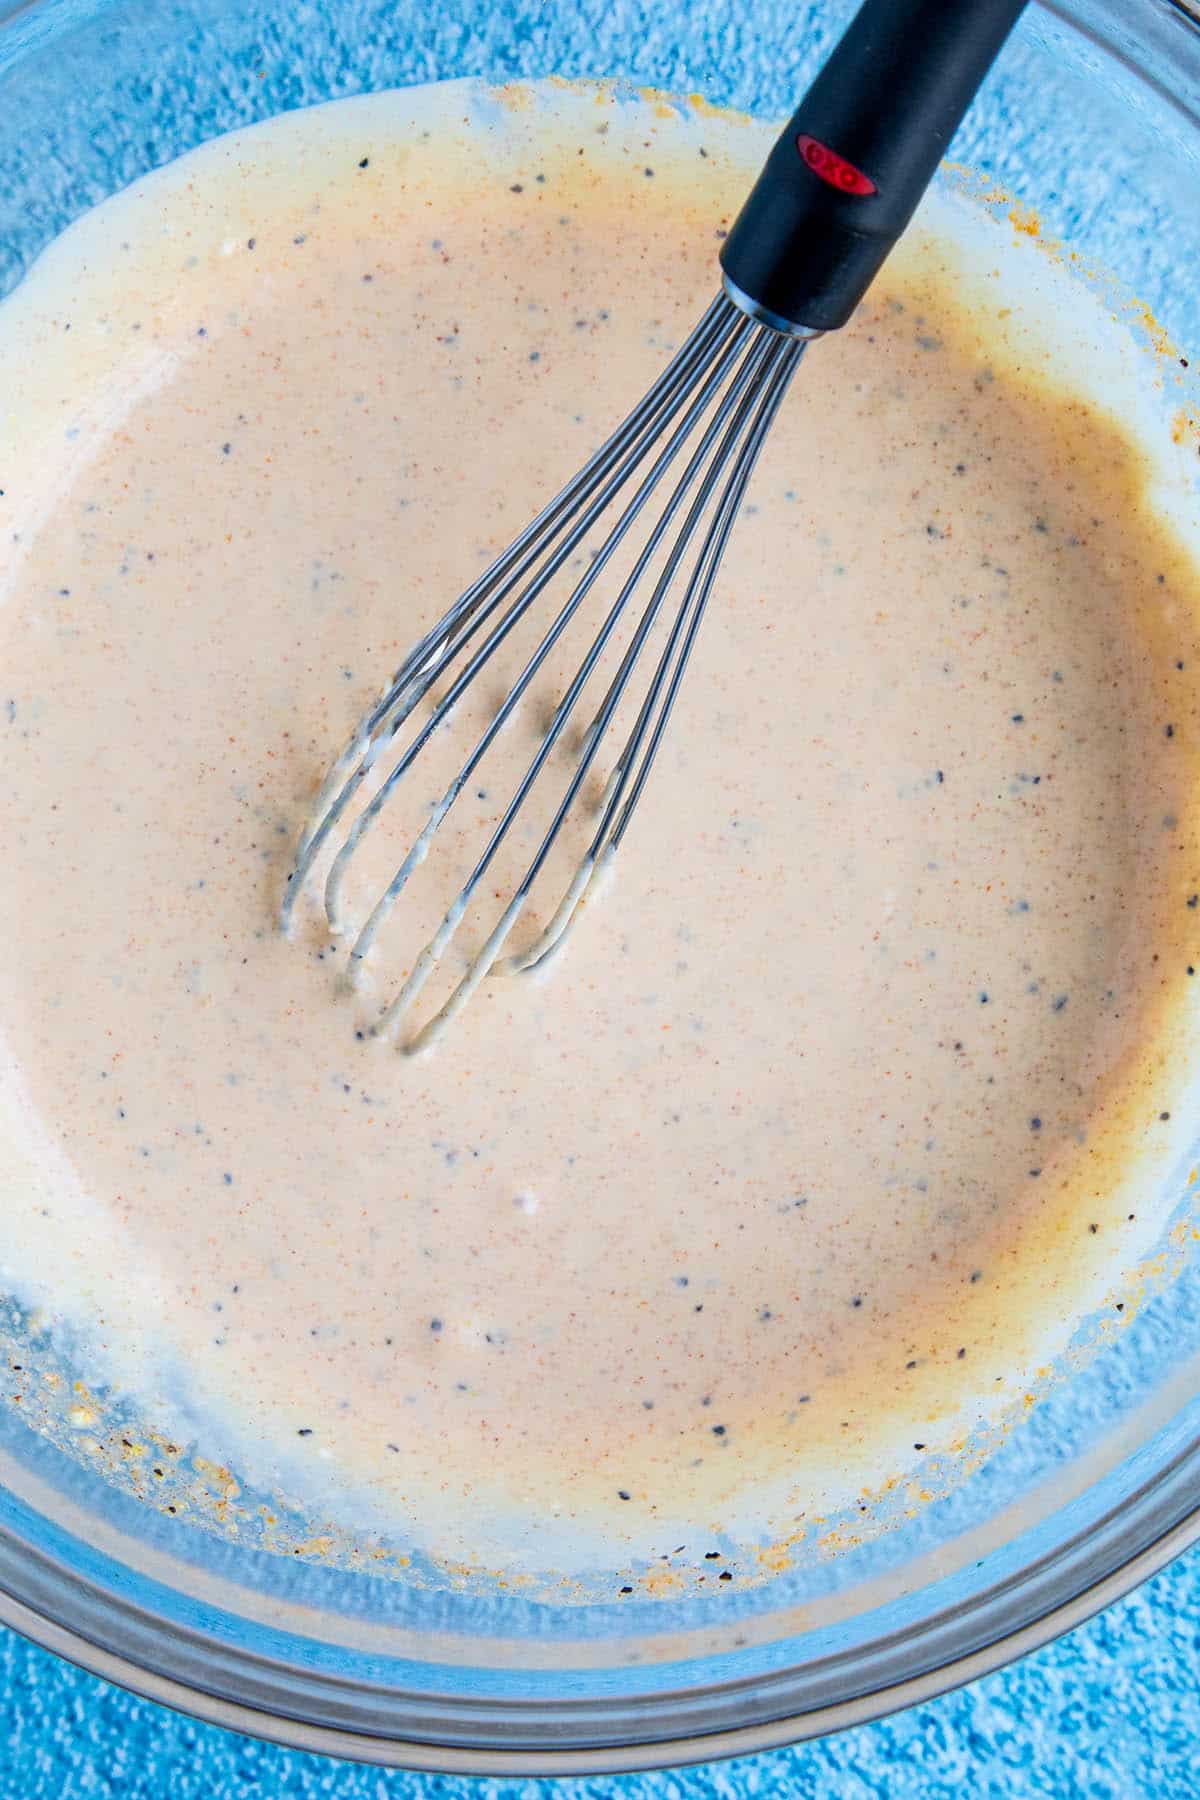 Alabama White BBQ Sauce whisked in a mixing bowl